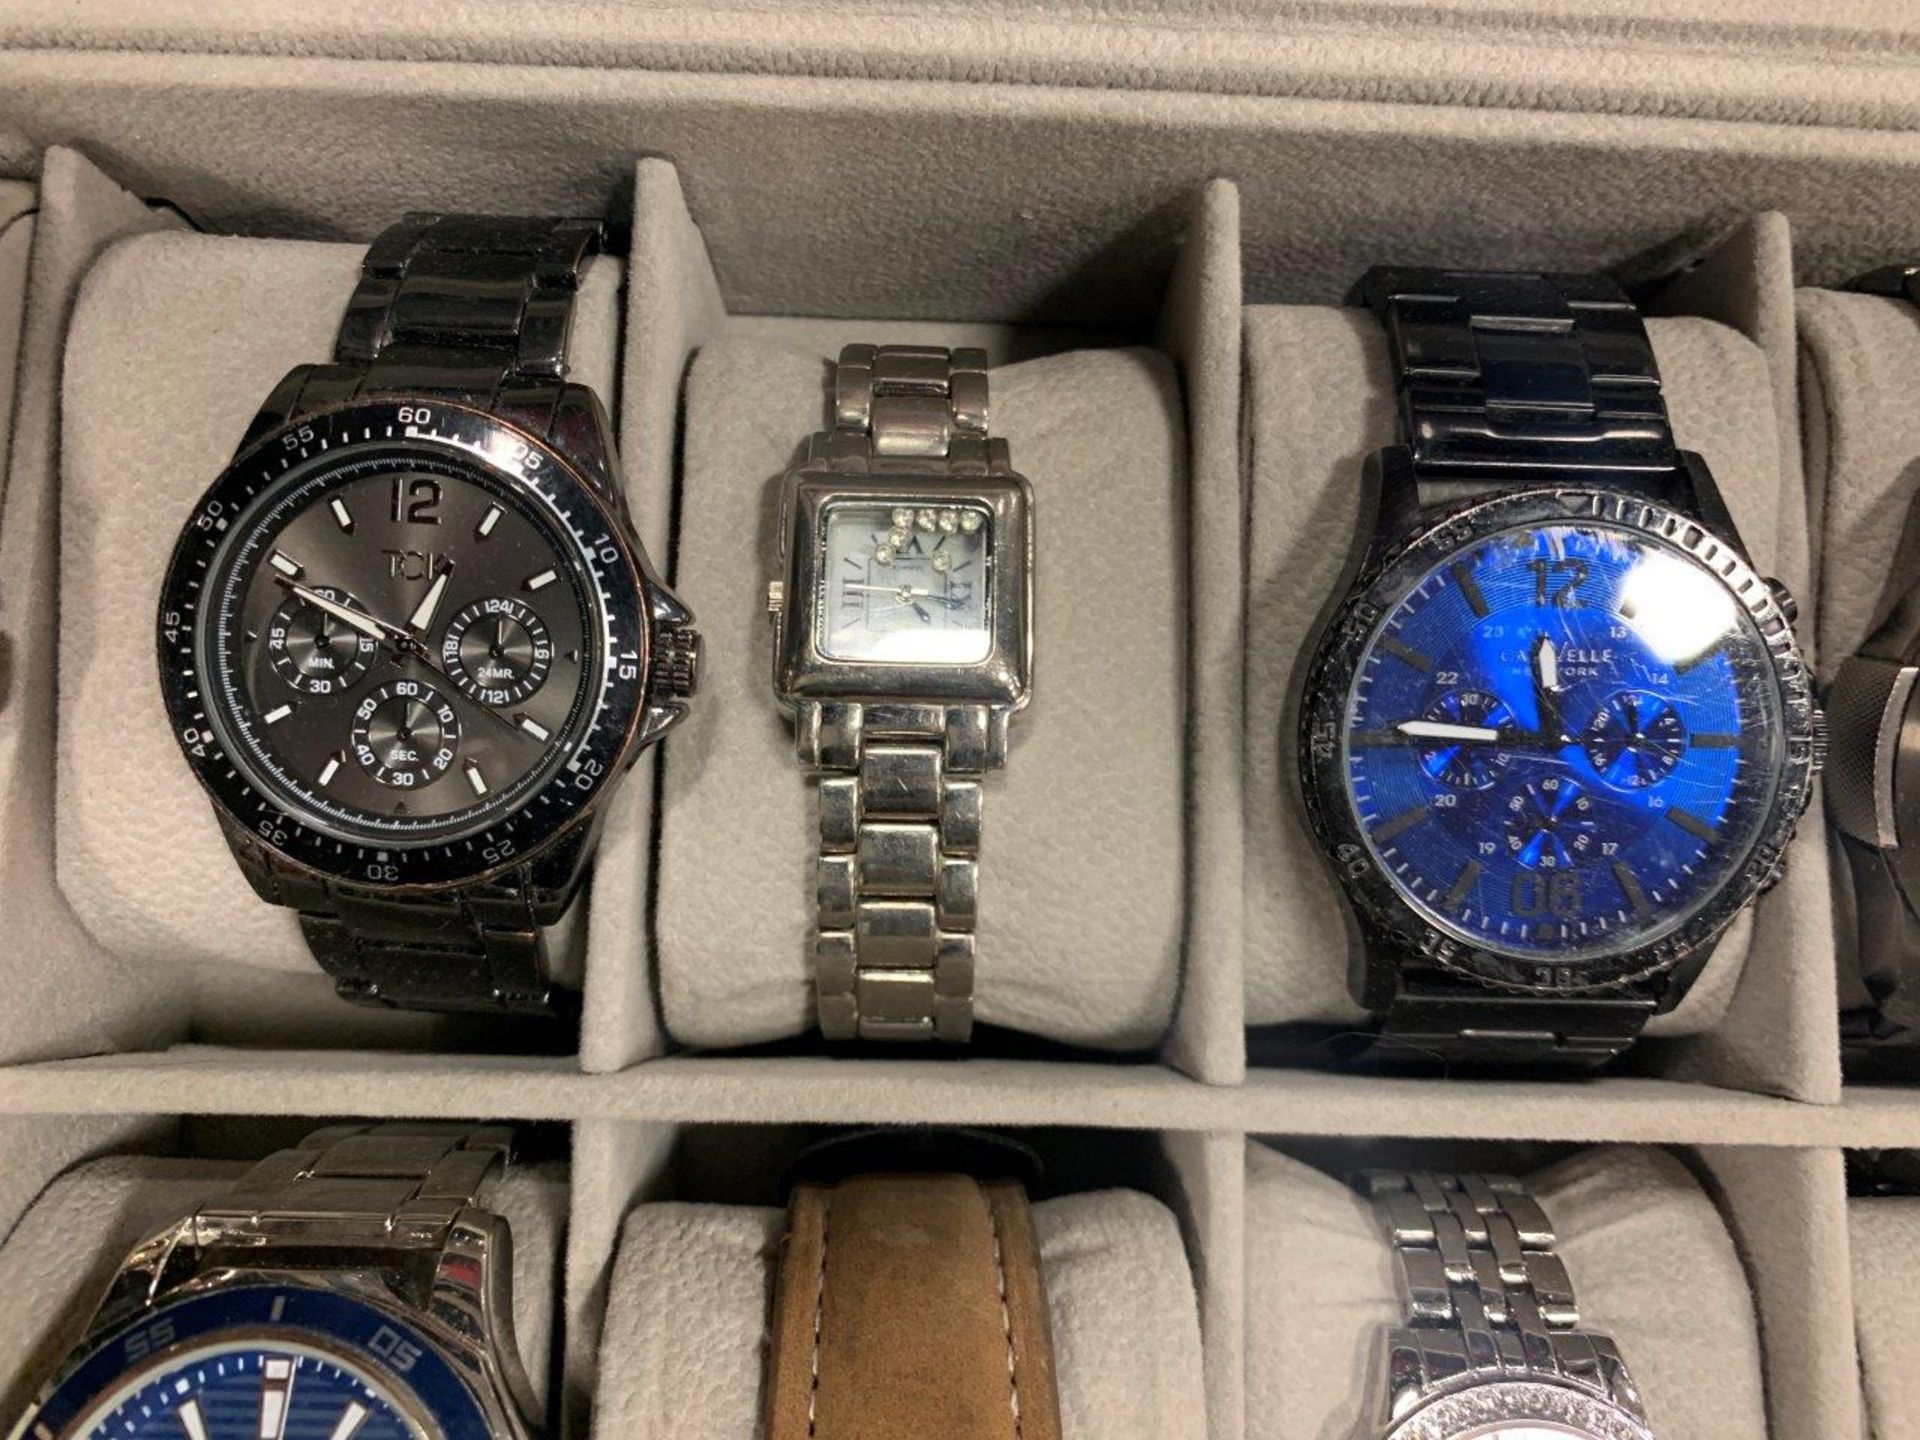 L/O ASSORTED WATCHES IN DISPLAY CASE - A31 - Image 4 of 9